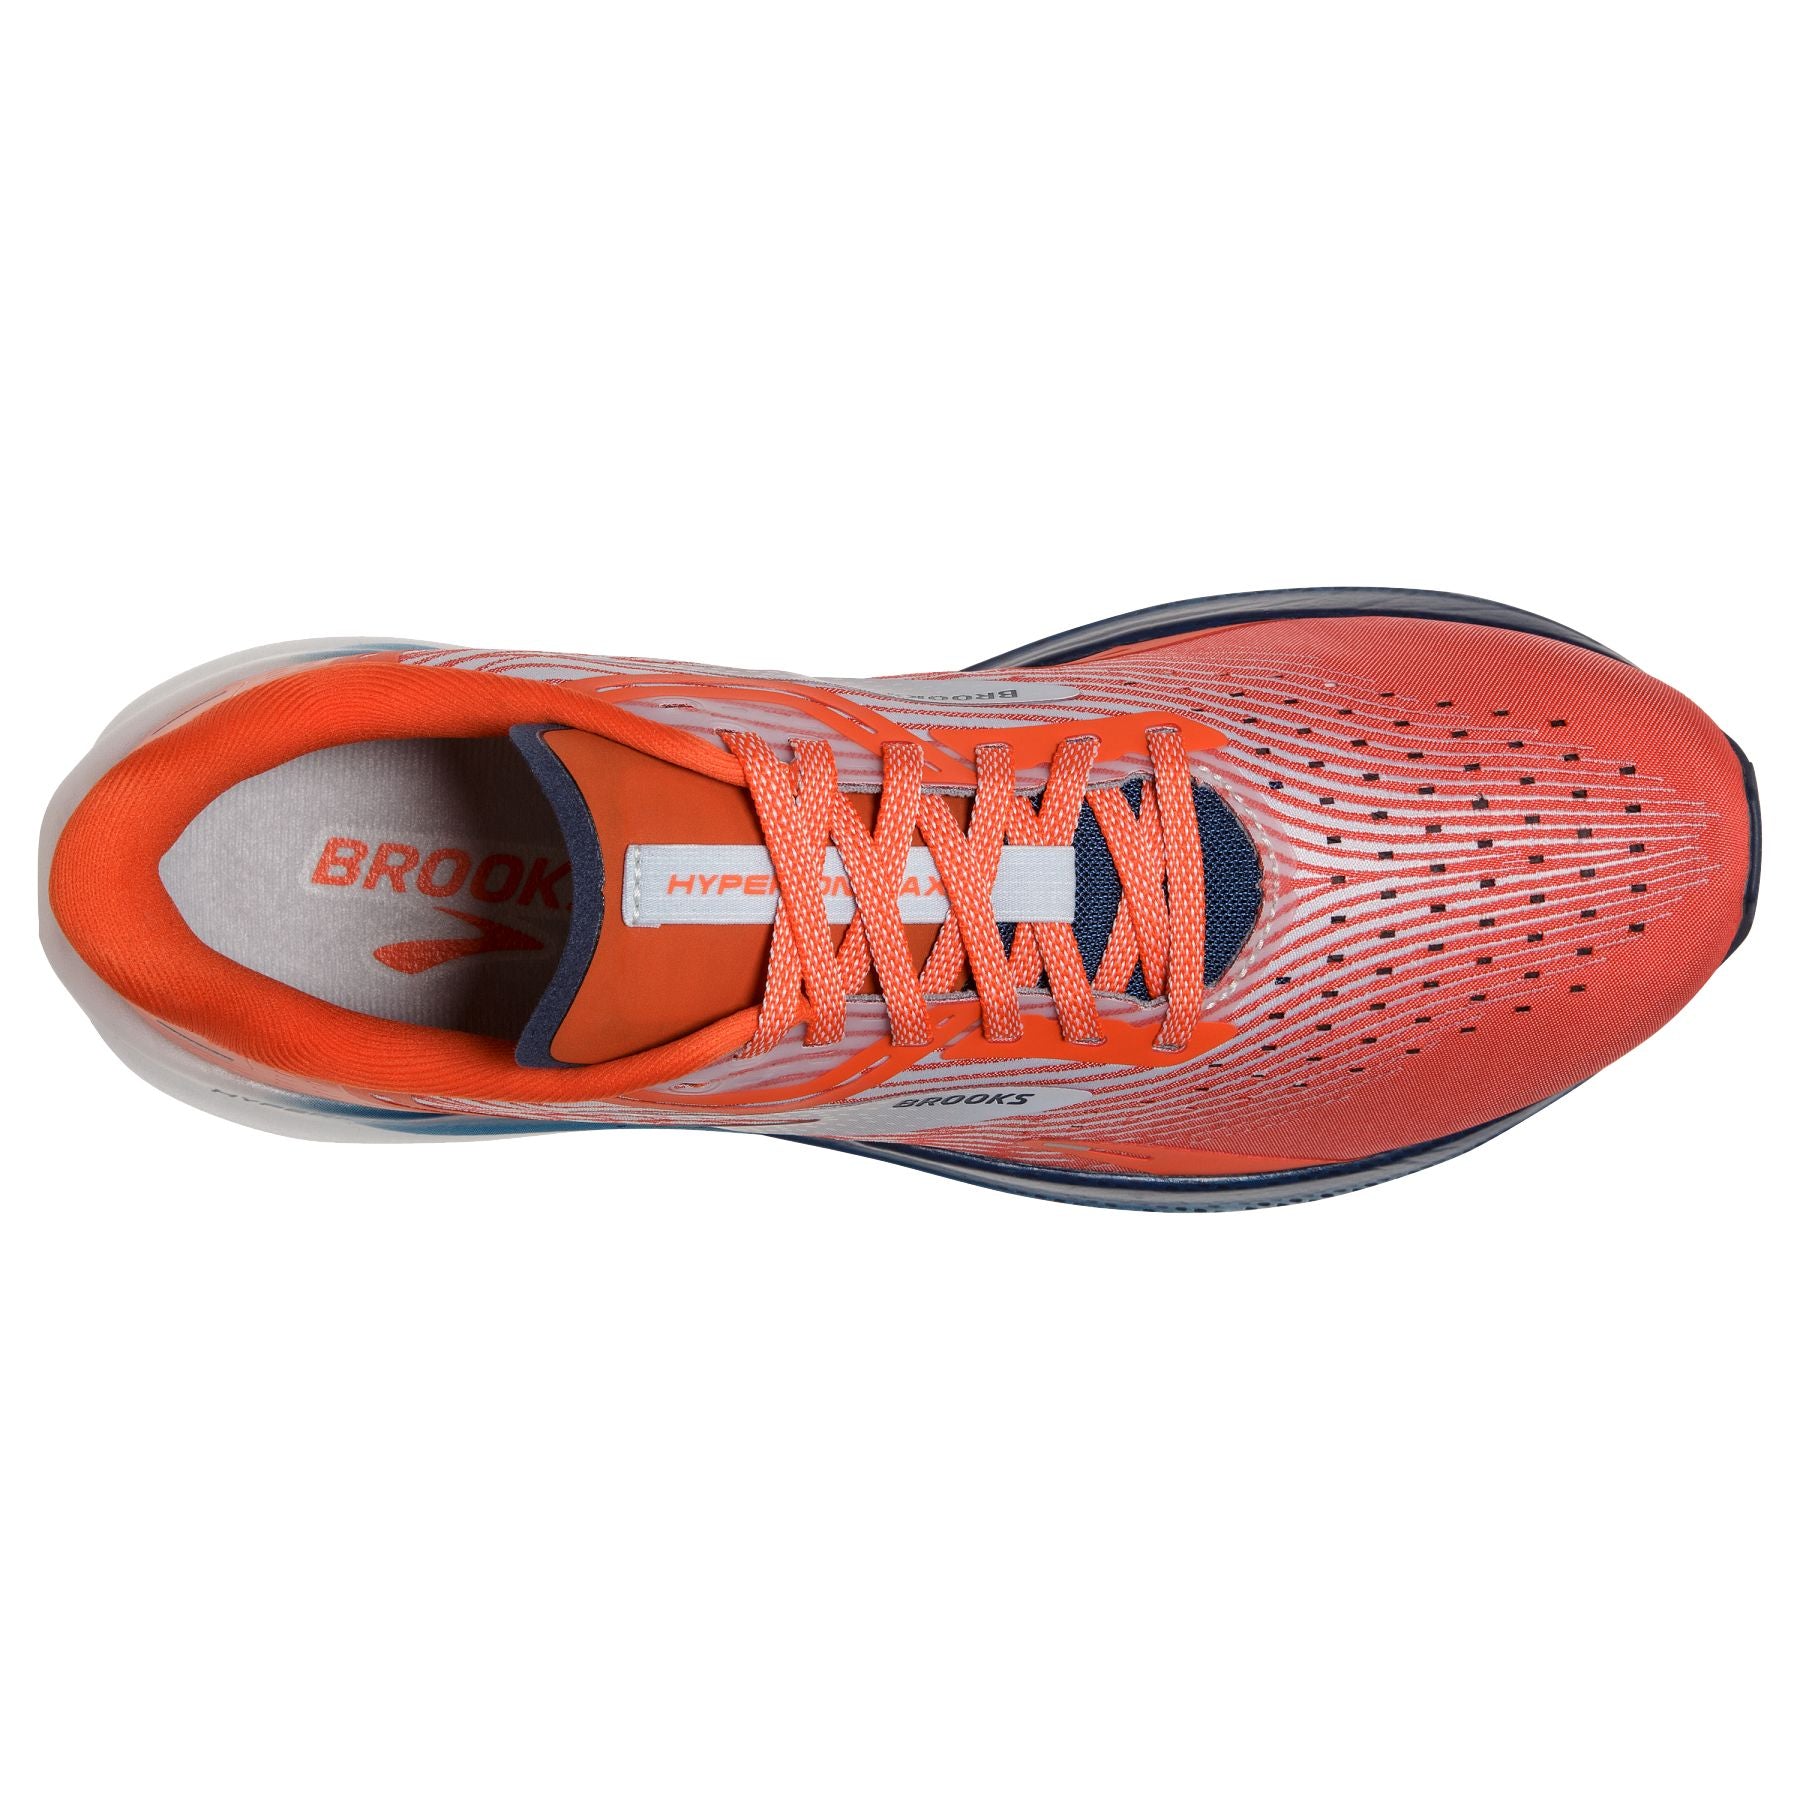 Top view of the Men's Hyperion Max by BROOKS in the color Cherry Tomato/Arctic Ice/Titan